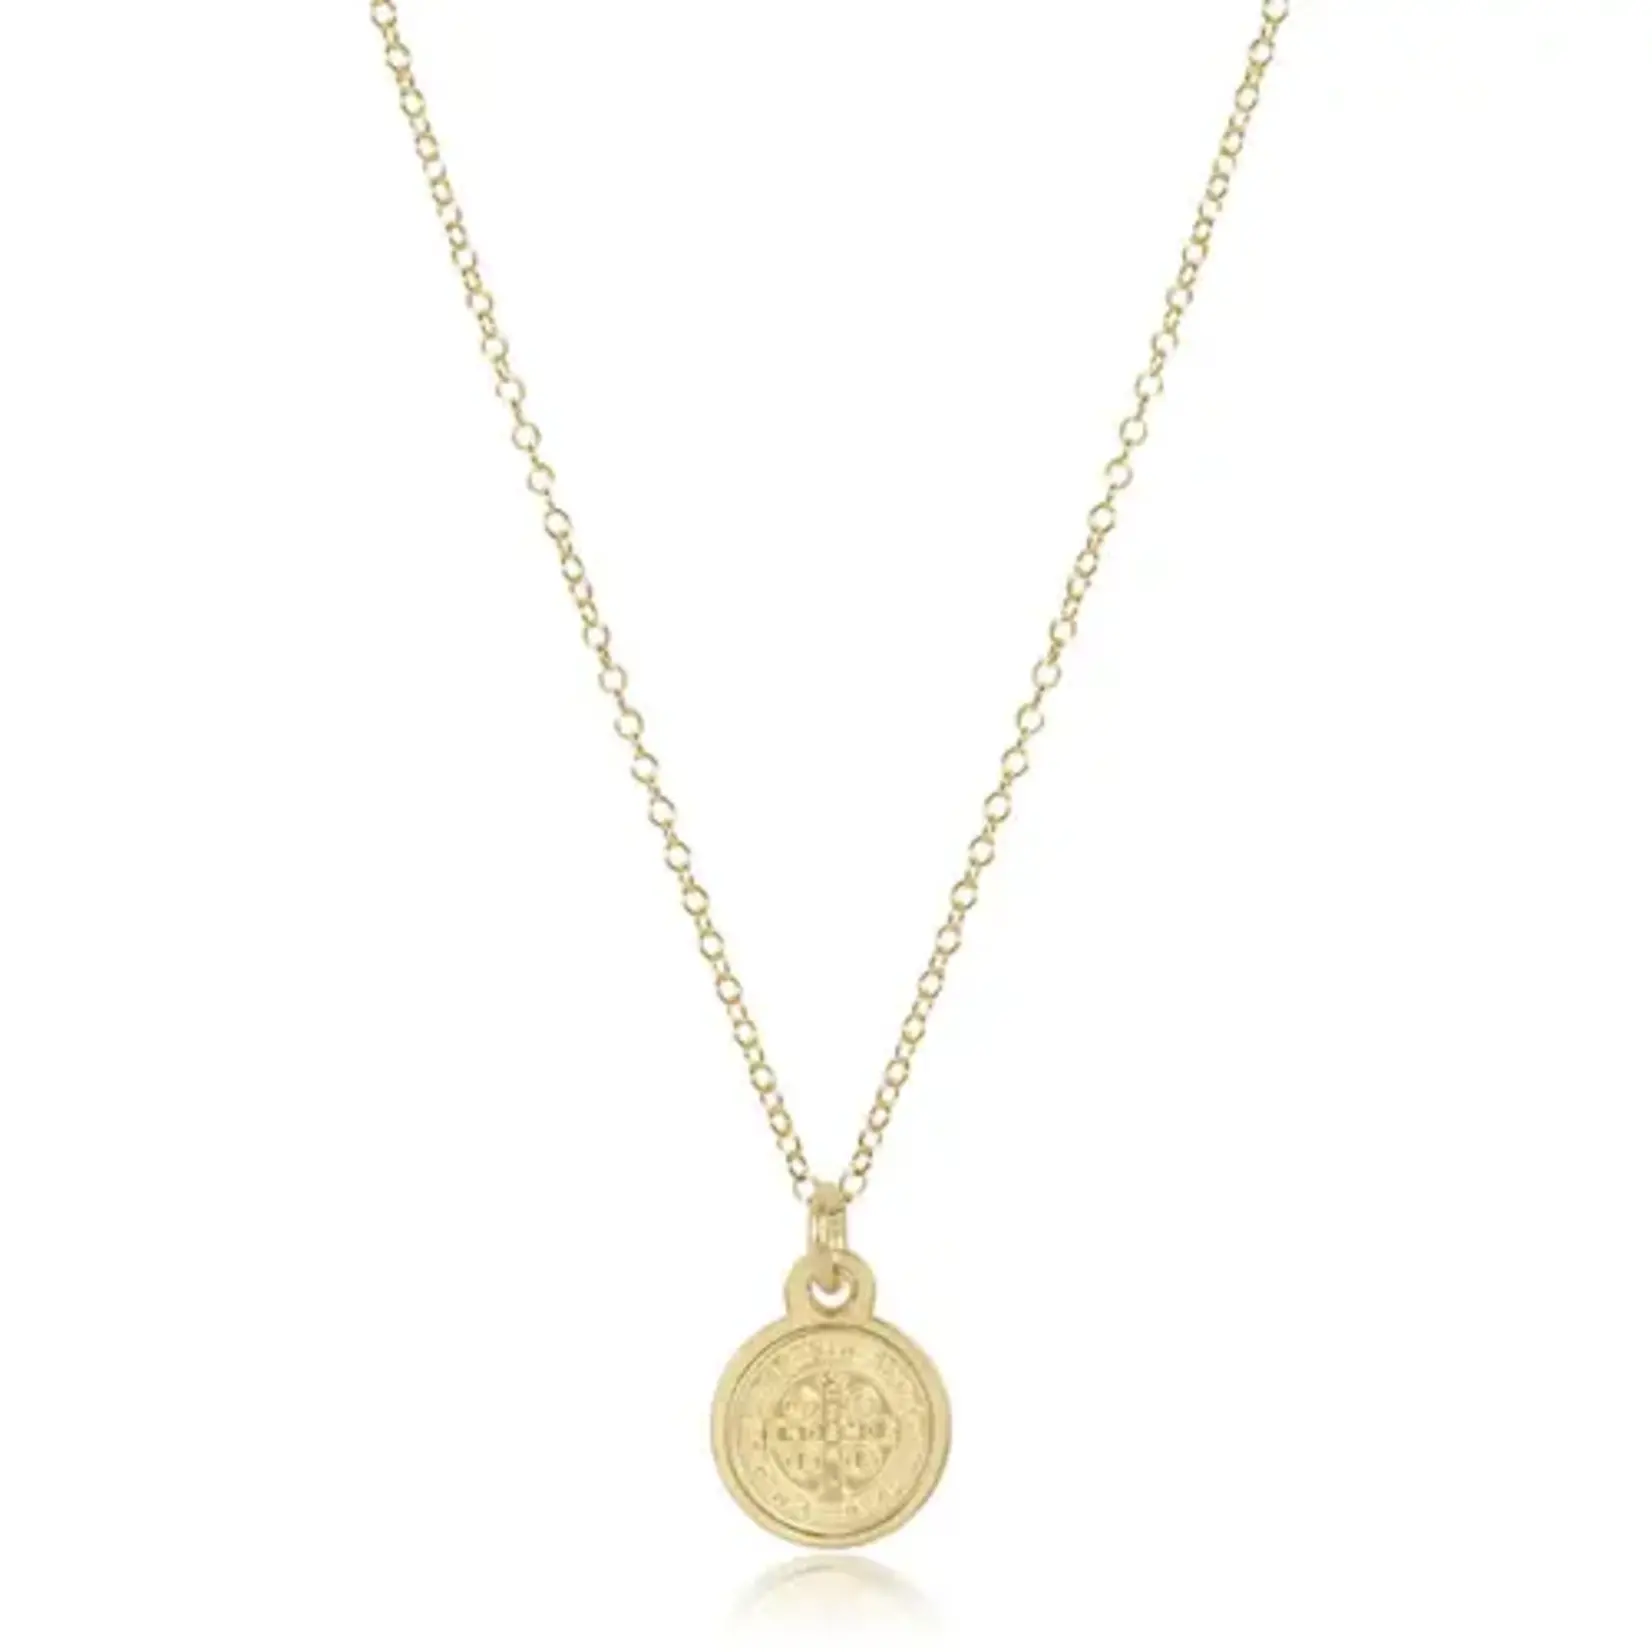 16" NECKLACE GOLD - BLESSING SMALL GOLD DISC